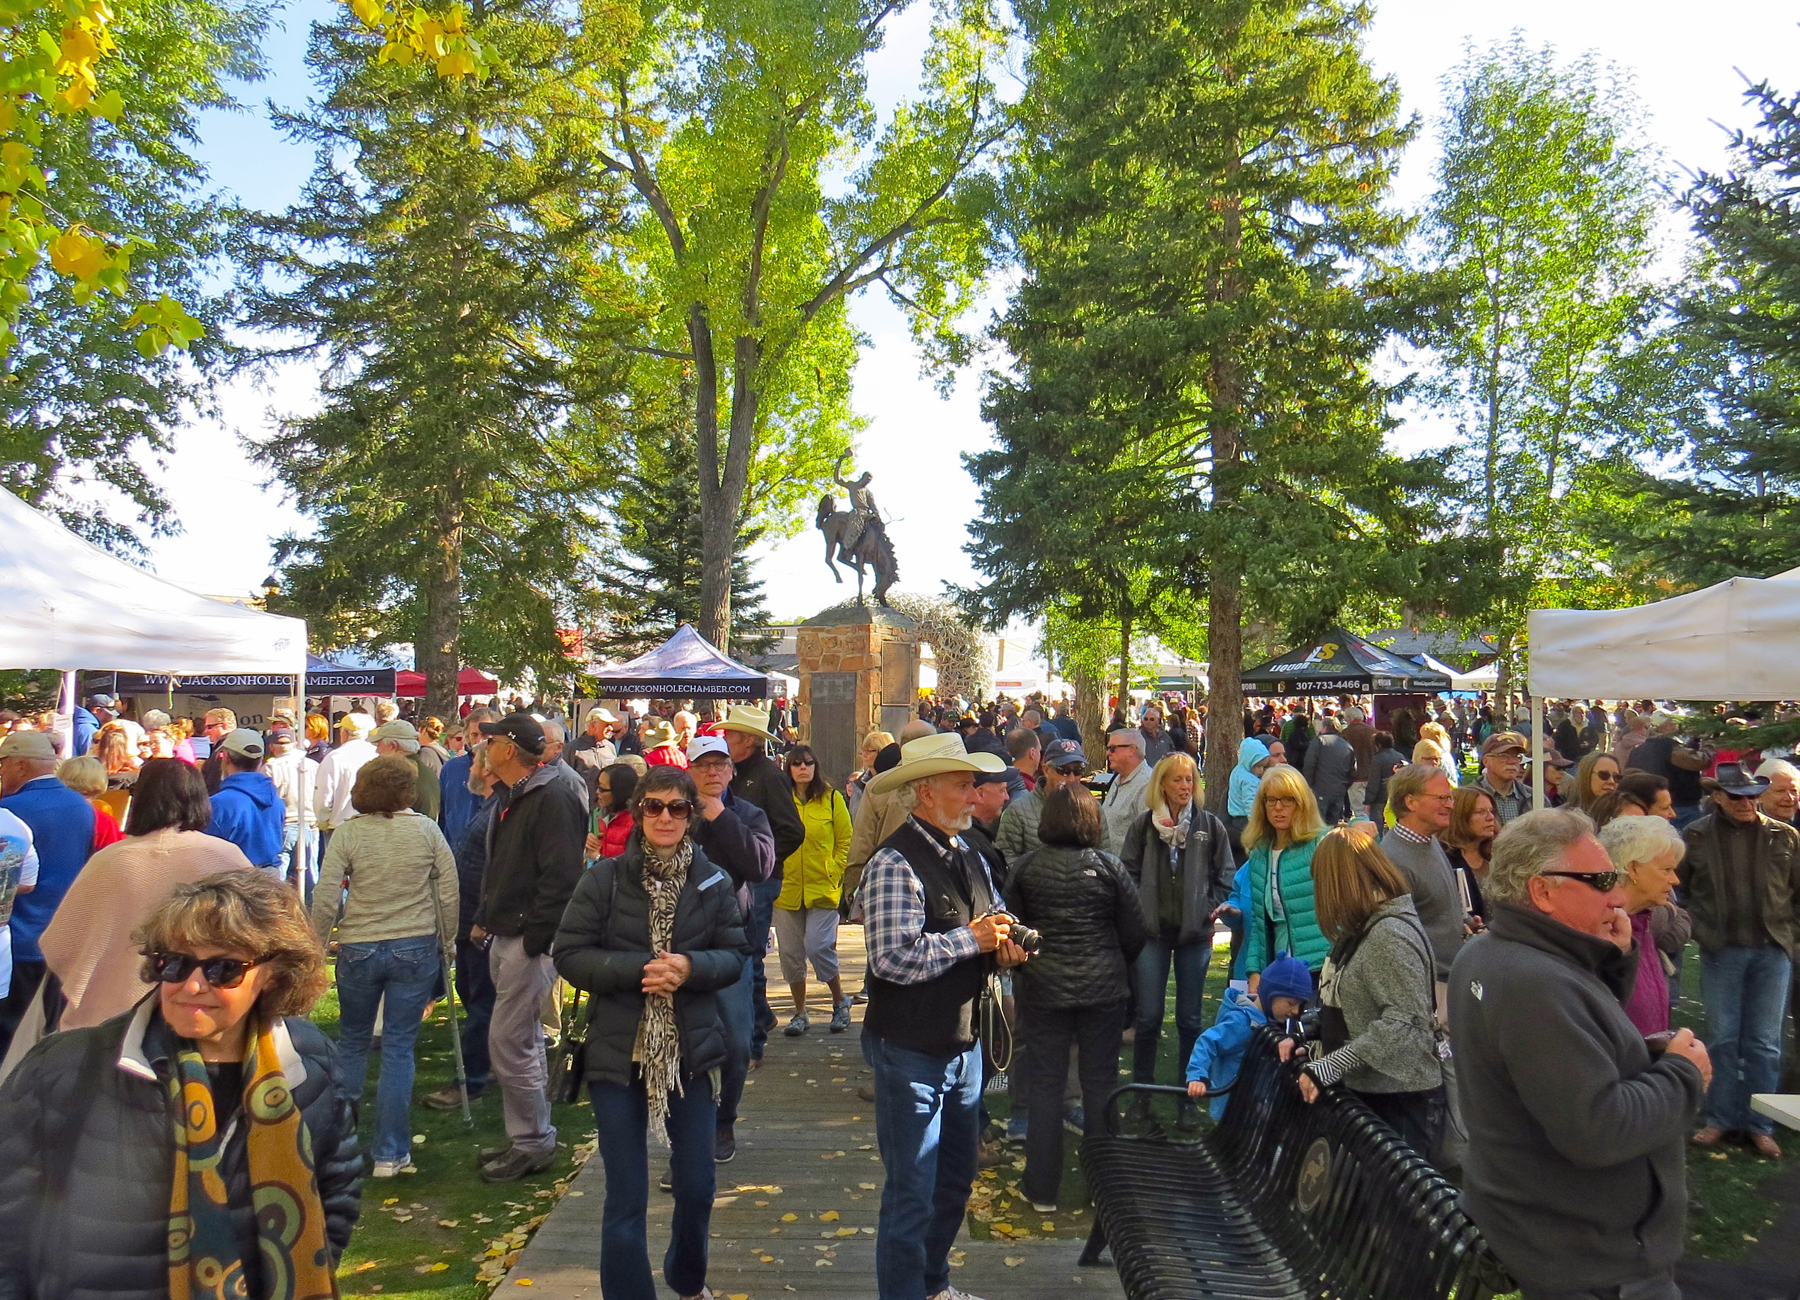 Many events of the Jackson Hole Fall Arts Festival in September take place within and around the town’s famous square, such as the QuickDraw and the Taste of the Tetons.